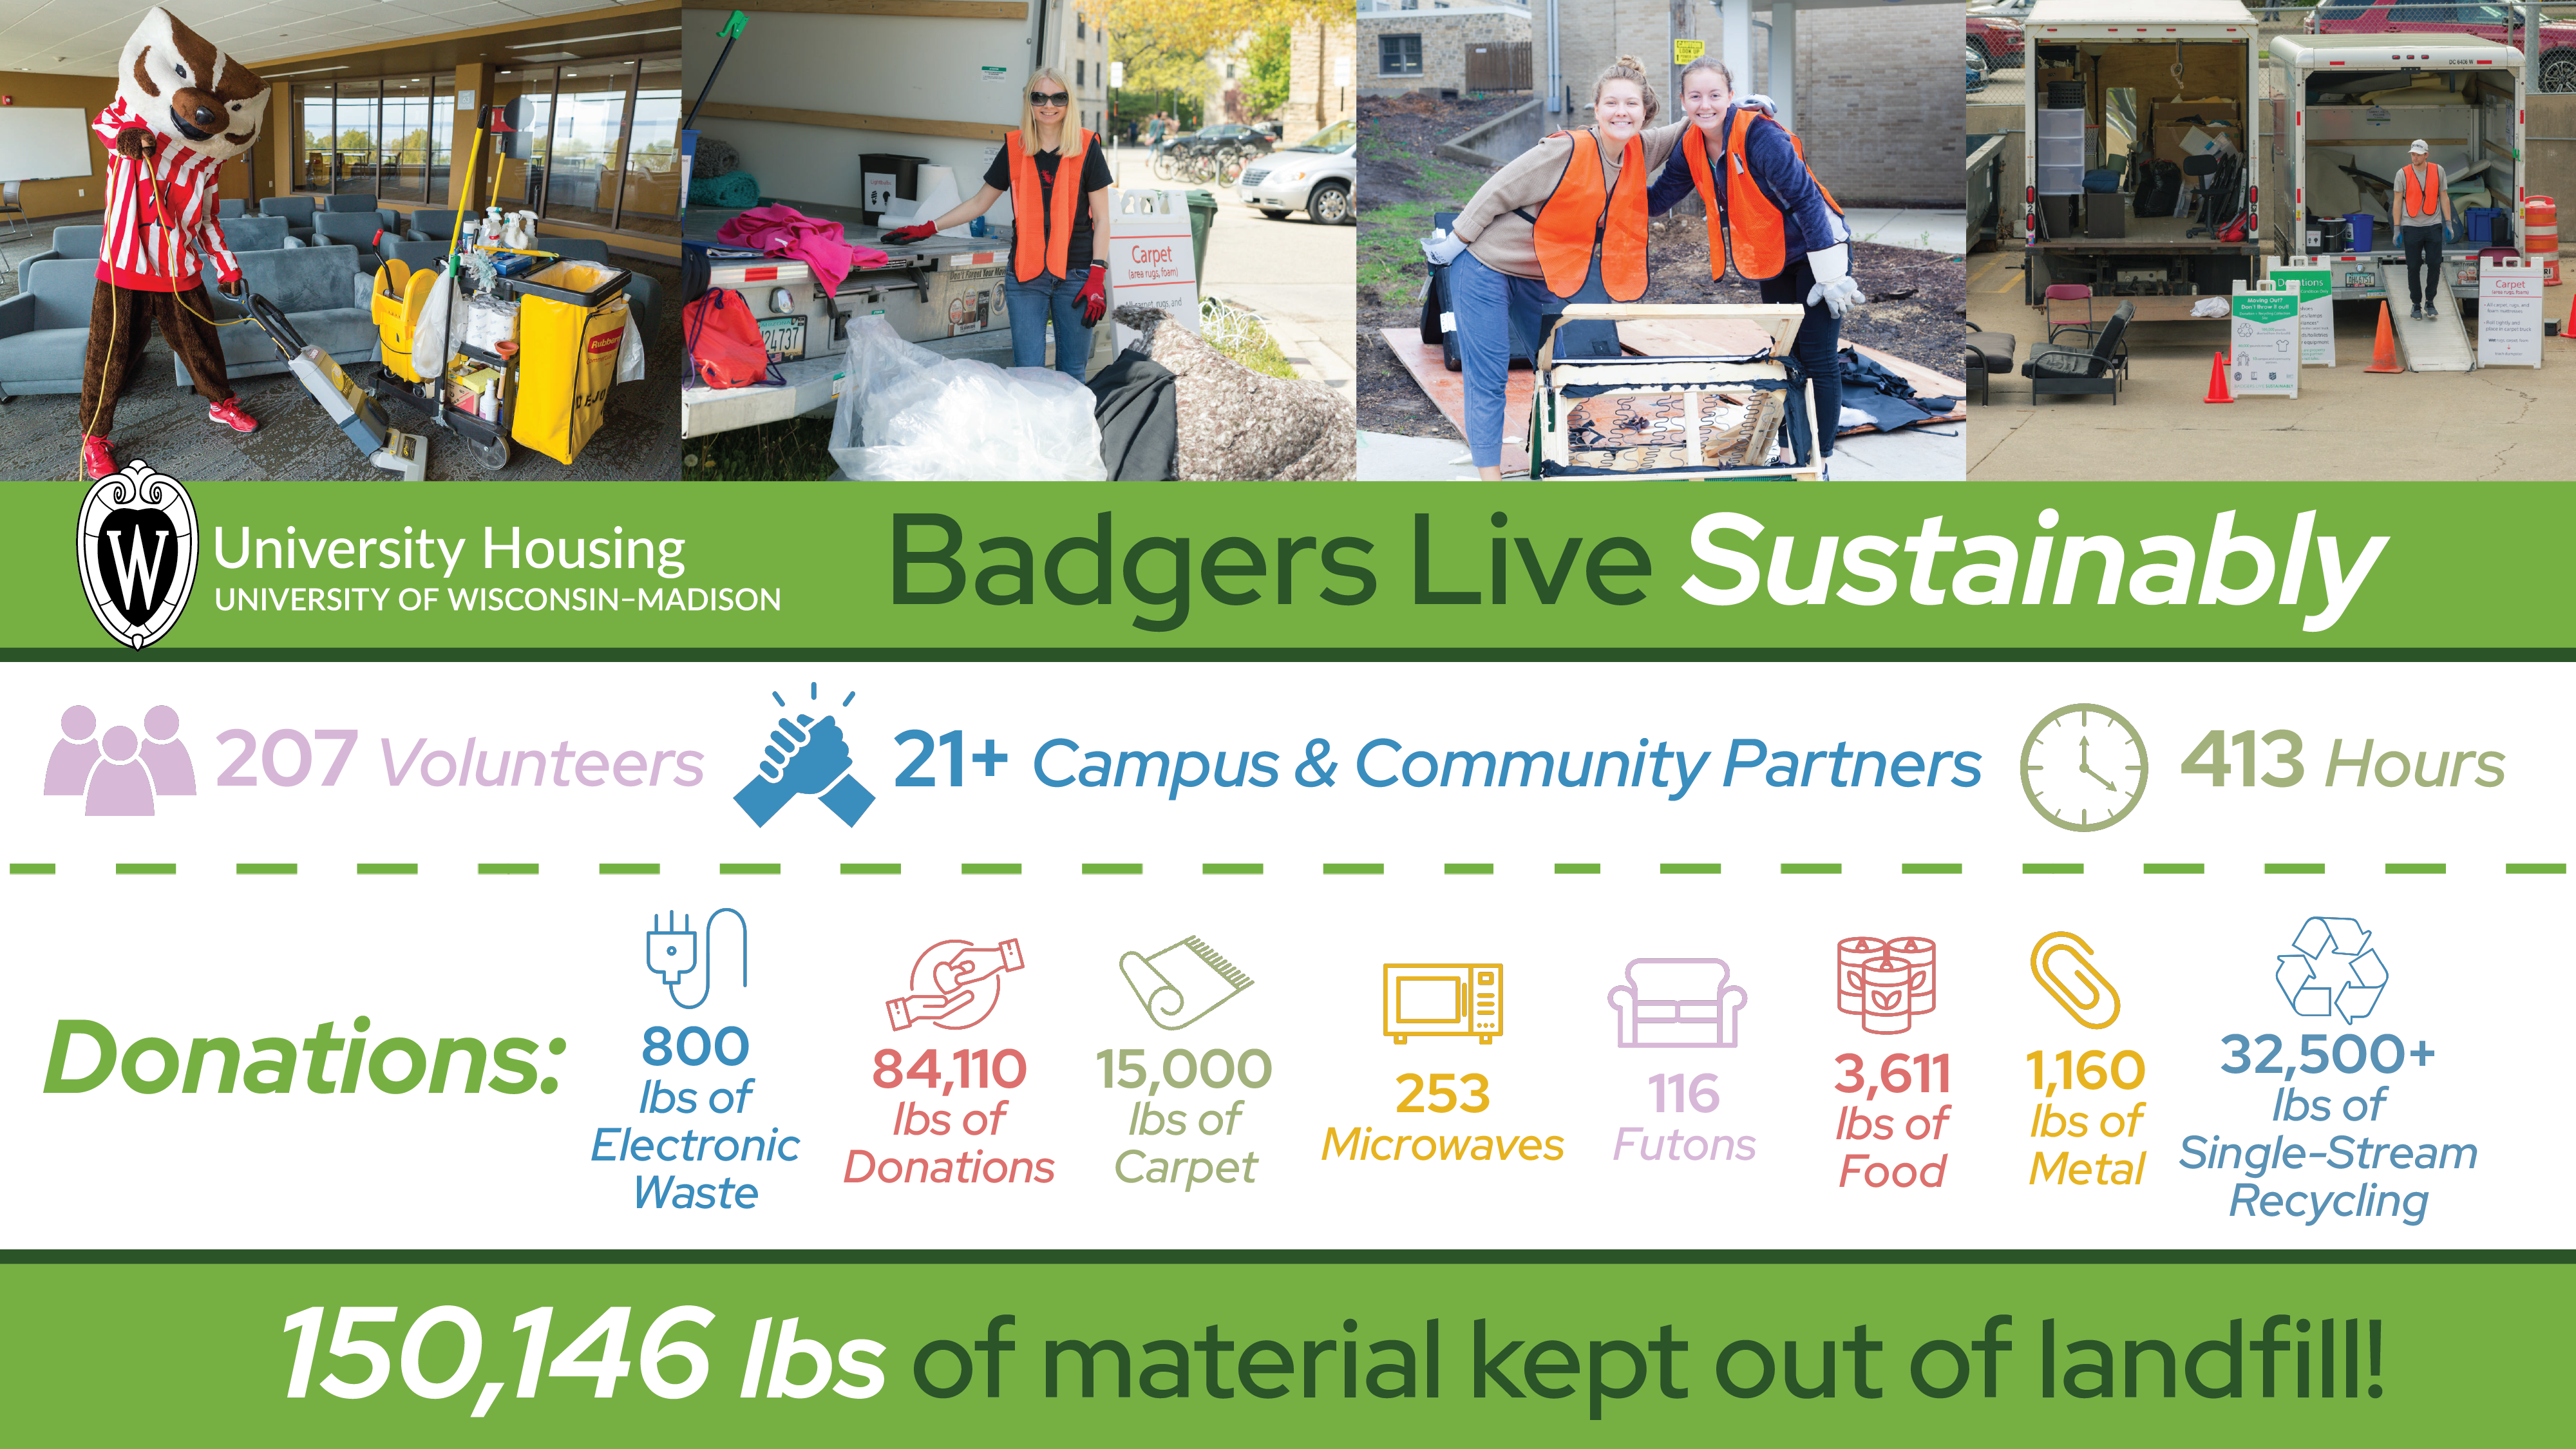 Badgers Live Sustainably
207 Volunteers
21+ Campus & Community Partners
413 Hours
_
Donations:
800
Ibs of electronic waste
84,110 lbs of donations
15,000 Ibs of carpet
253 microwaves
116 futons
3,611 Ibs of Food
1160 lbs of metal
32.500+
lbs of Single-Stream
Recycling
150,146 lbs of material kept out of landfill!